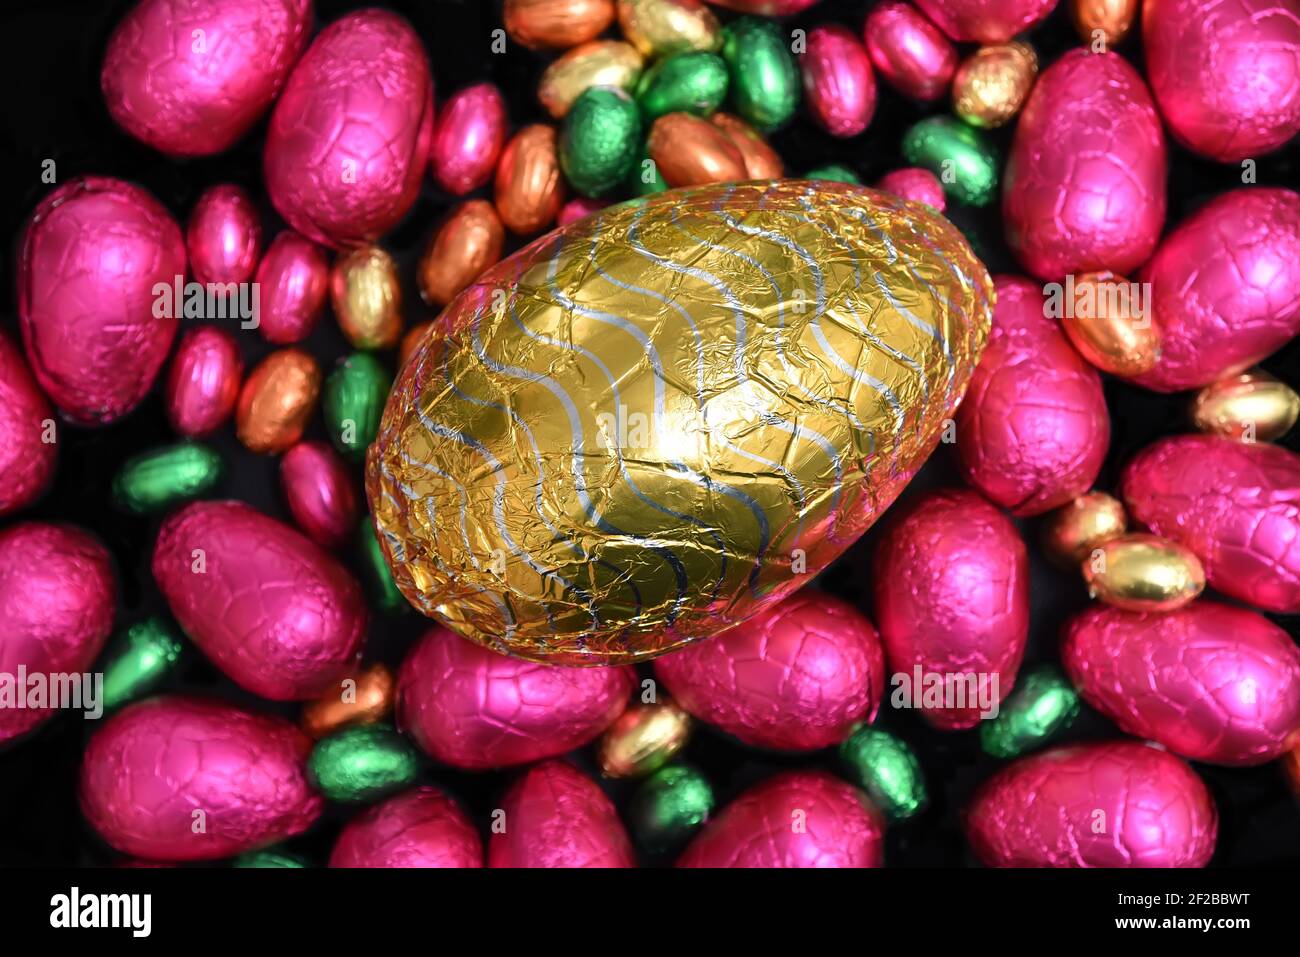 Pile or group of multi colored and different sizes of colourful foil wrapped chocolate easter eggs in pink, red, gold and lime green. Stock Photo